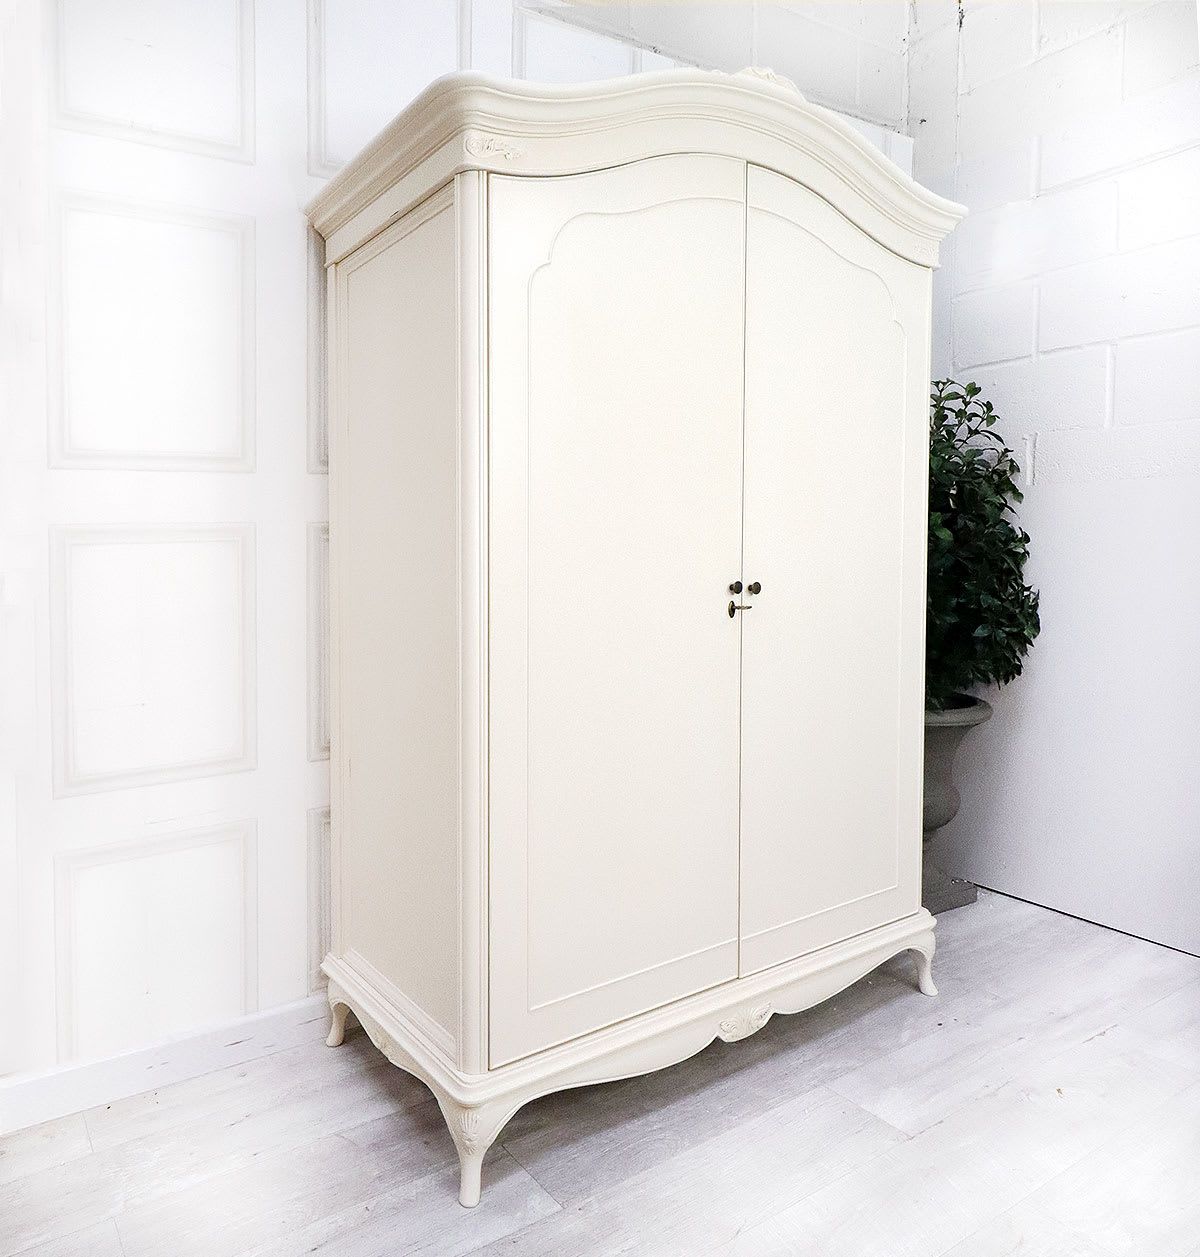 Willis & Gambier French Style Ivory Large Armoire Wardrobe | Nicky Cornell  A Uk Stockist Pertaining To French Armoire Wardrobes (Gallery 5 of 20)